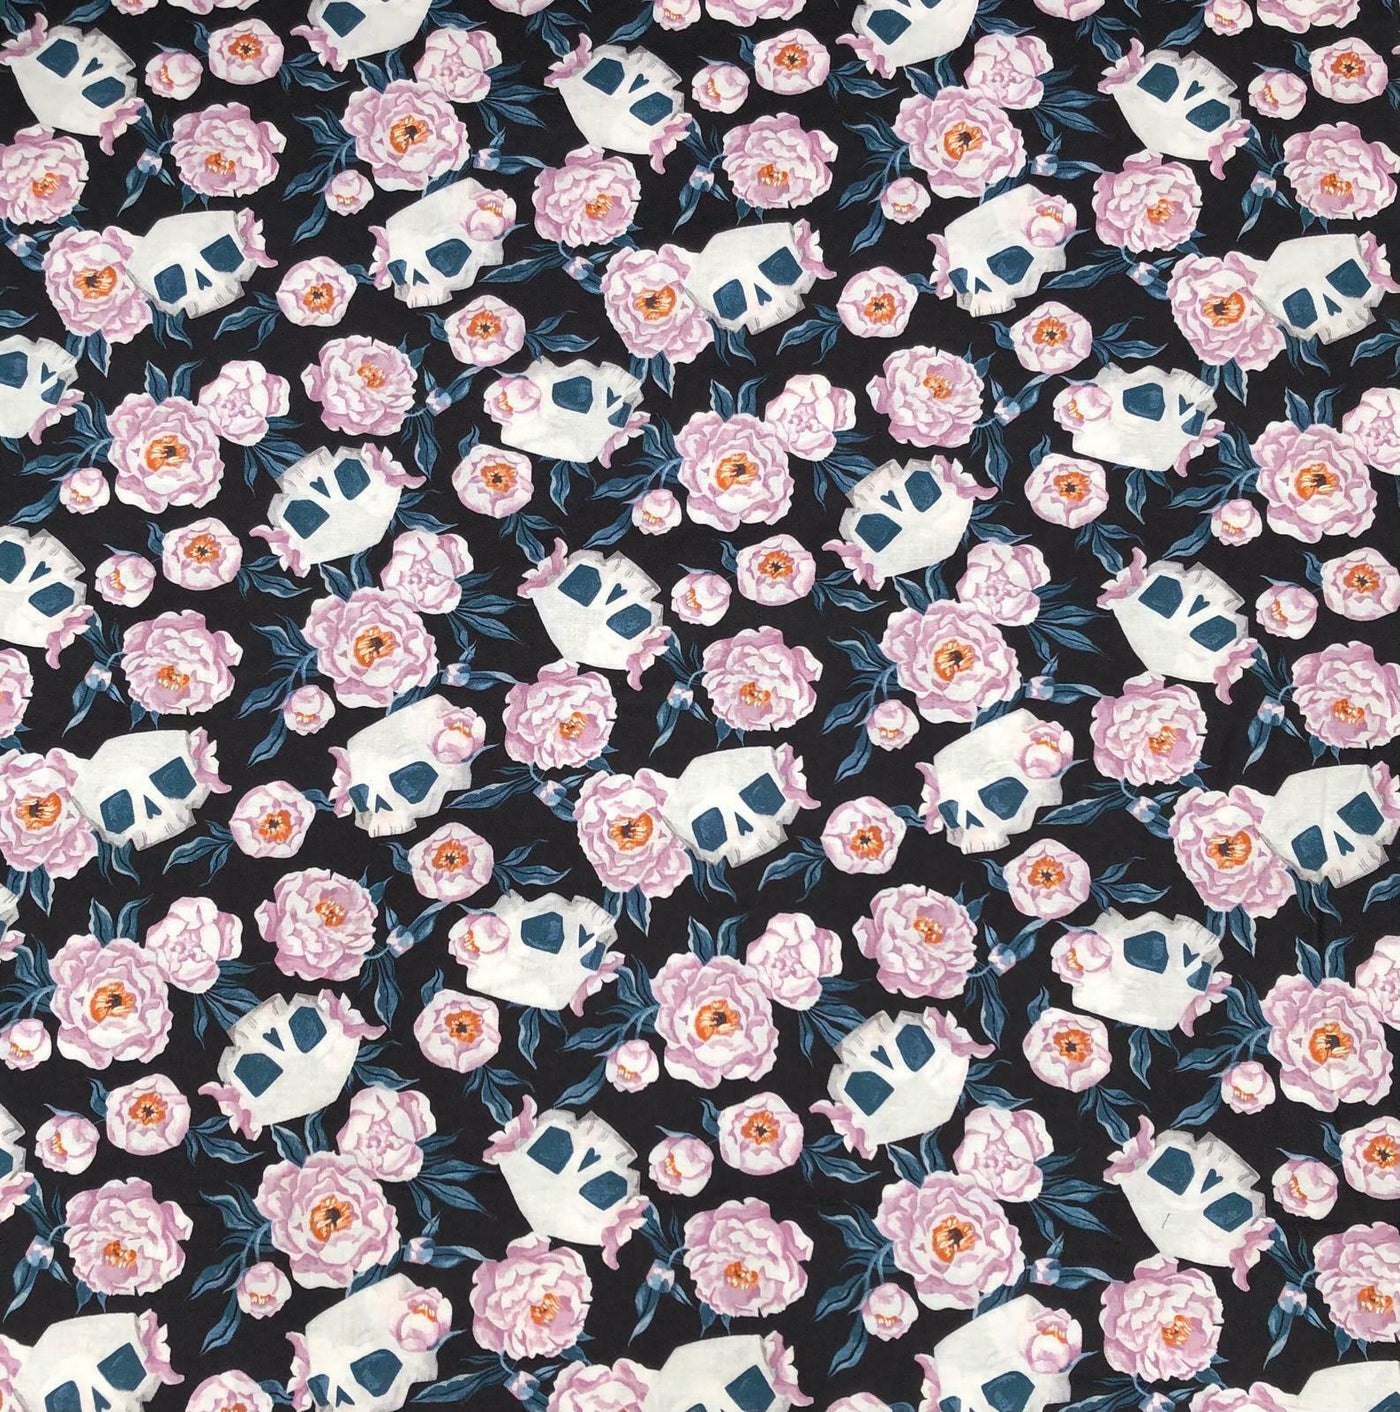 Skull Floral Dear Stella Peony Metre 100% Cotton Ideal for Face Masks & Apparel